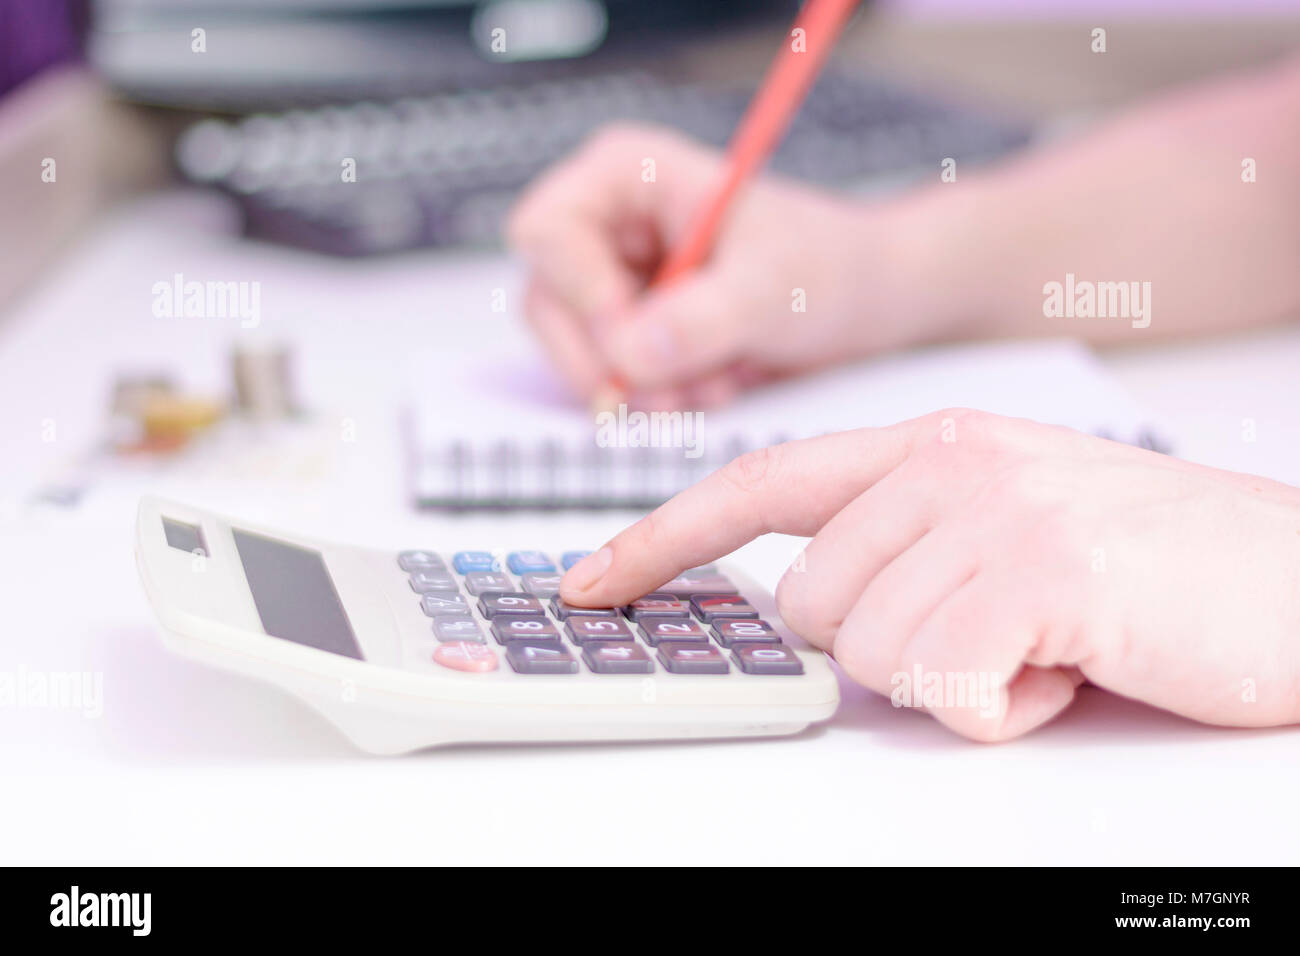 Photo of a hand counting on a calculator and holding a red pencil. Close up of a man counting on a calculator. Financial data analizing. Stock Photo